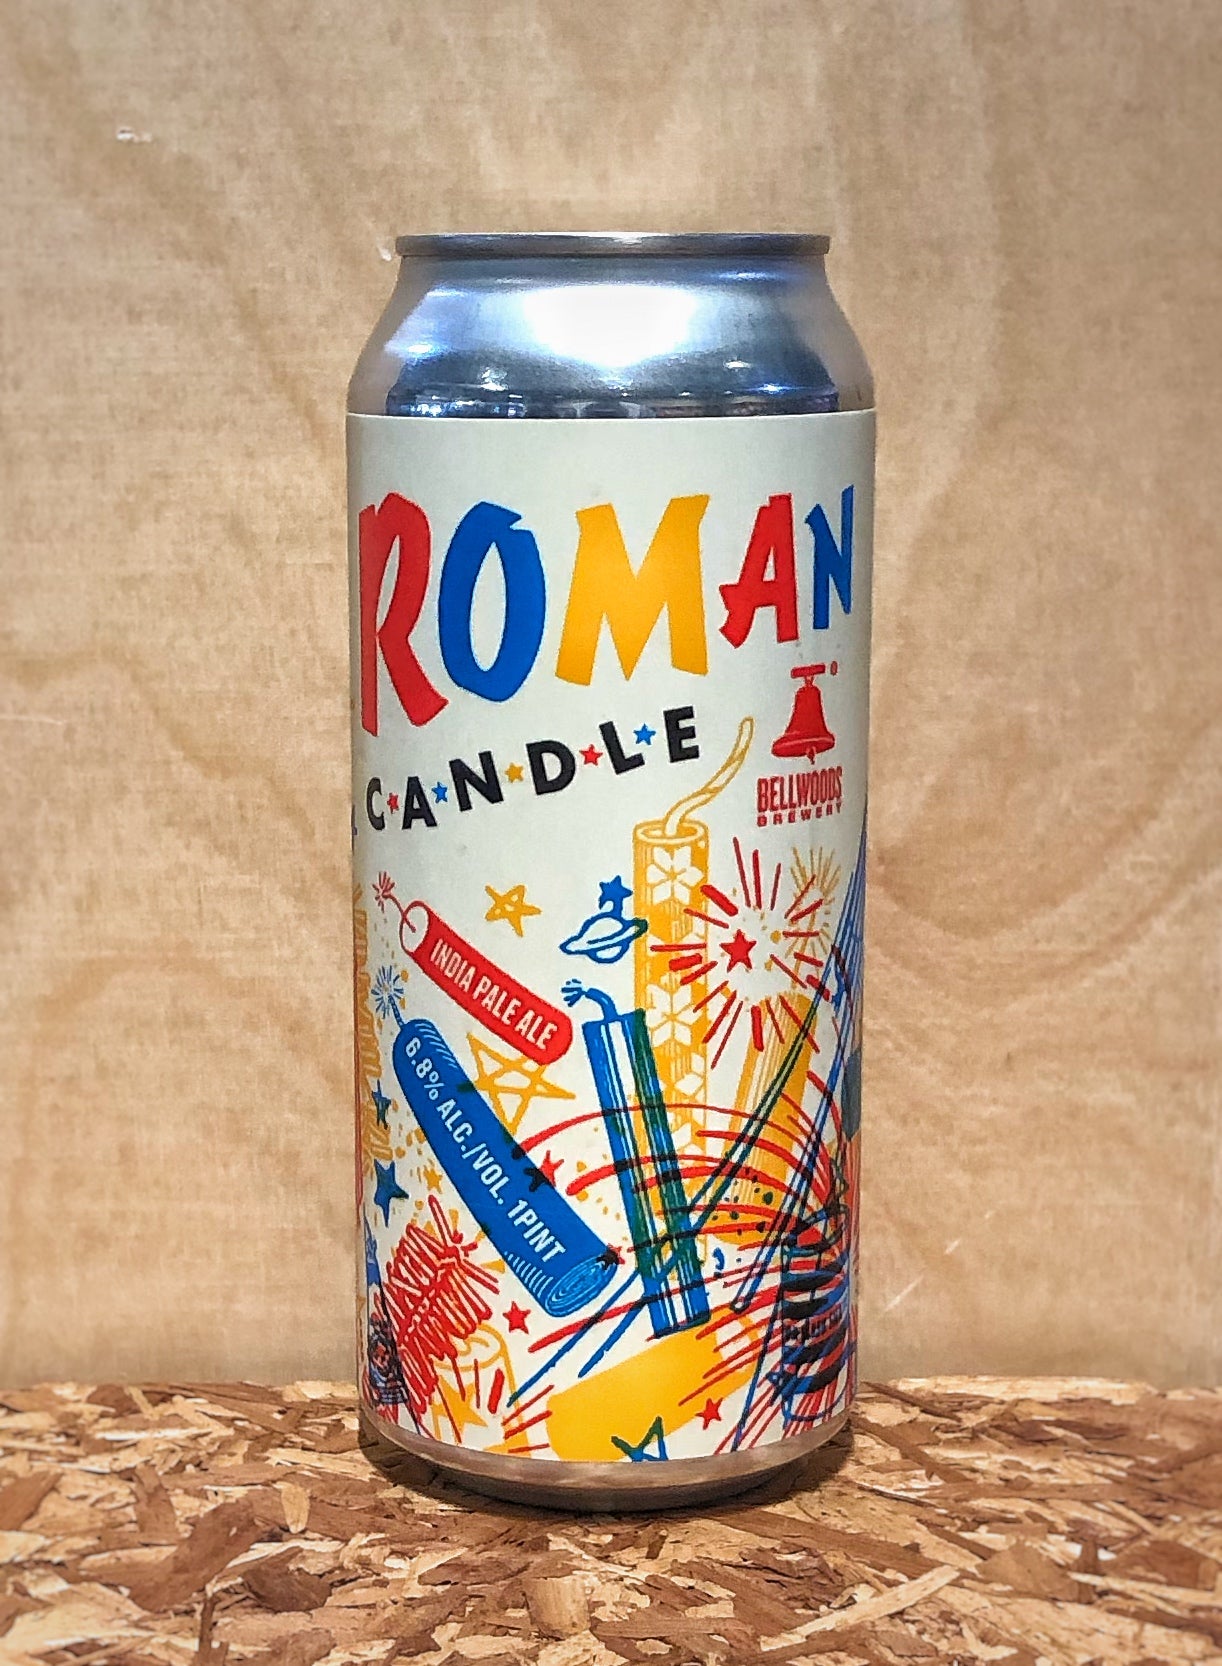 Bellwoods Brewery 'Roman Candle' India Pale Ale (Toronto, Ontario)